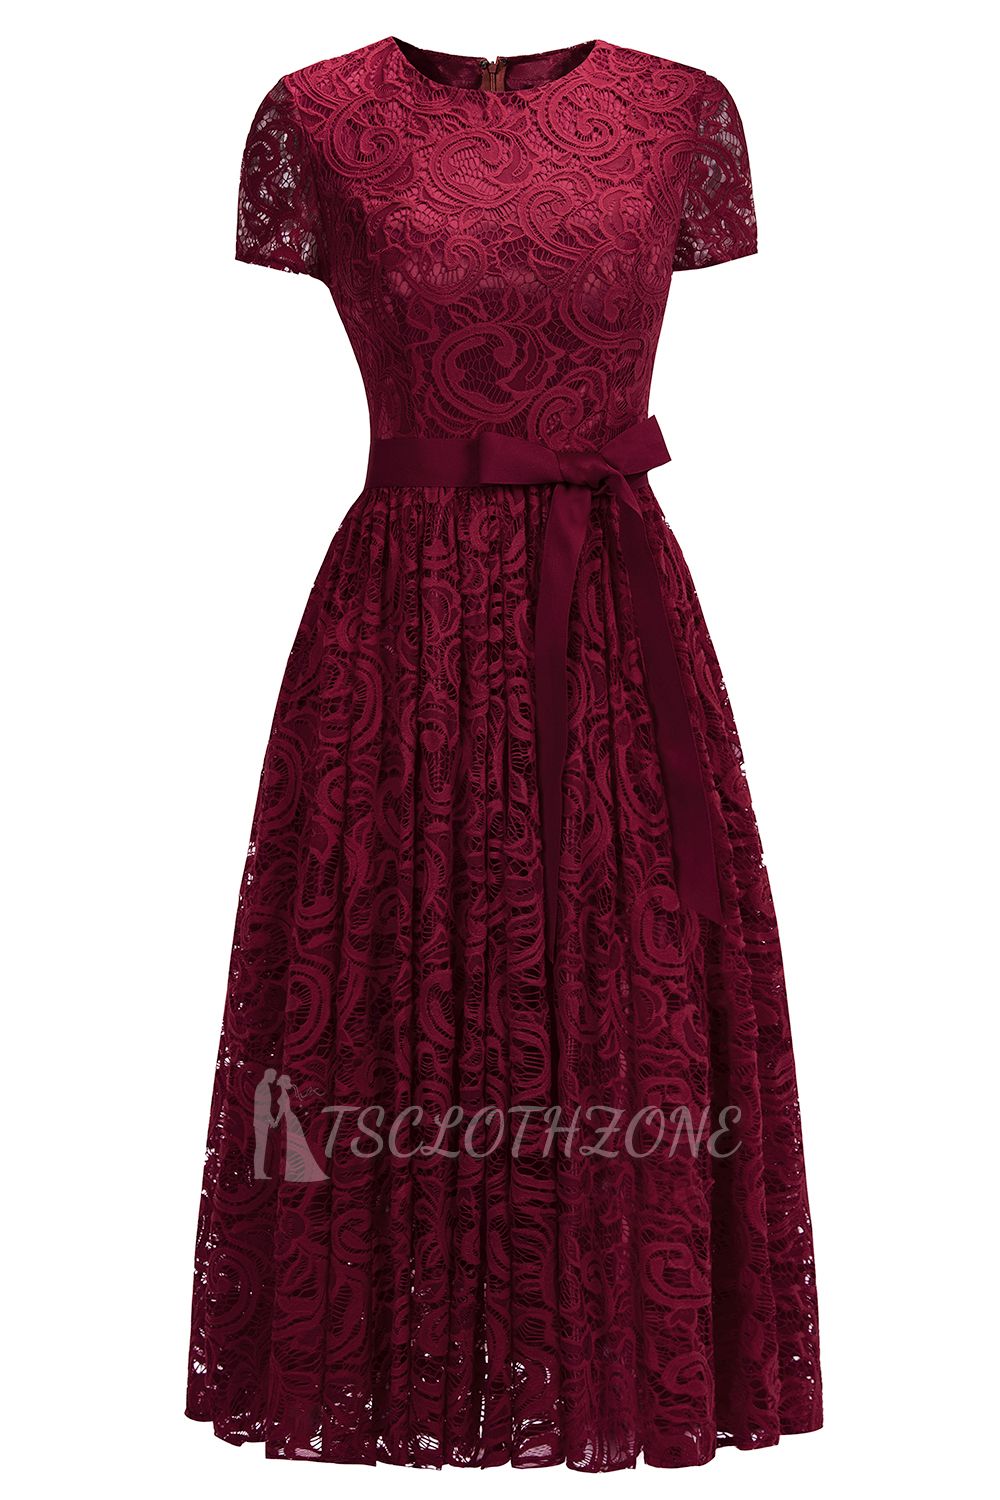 Short Sleeves Seath Red Lace Dresses with Ribbon Bow